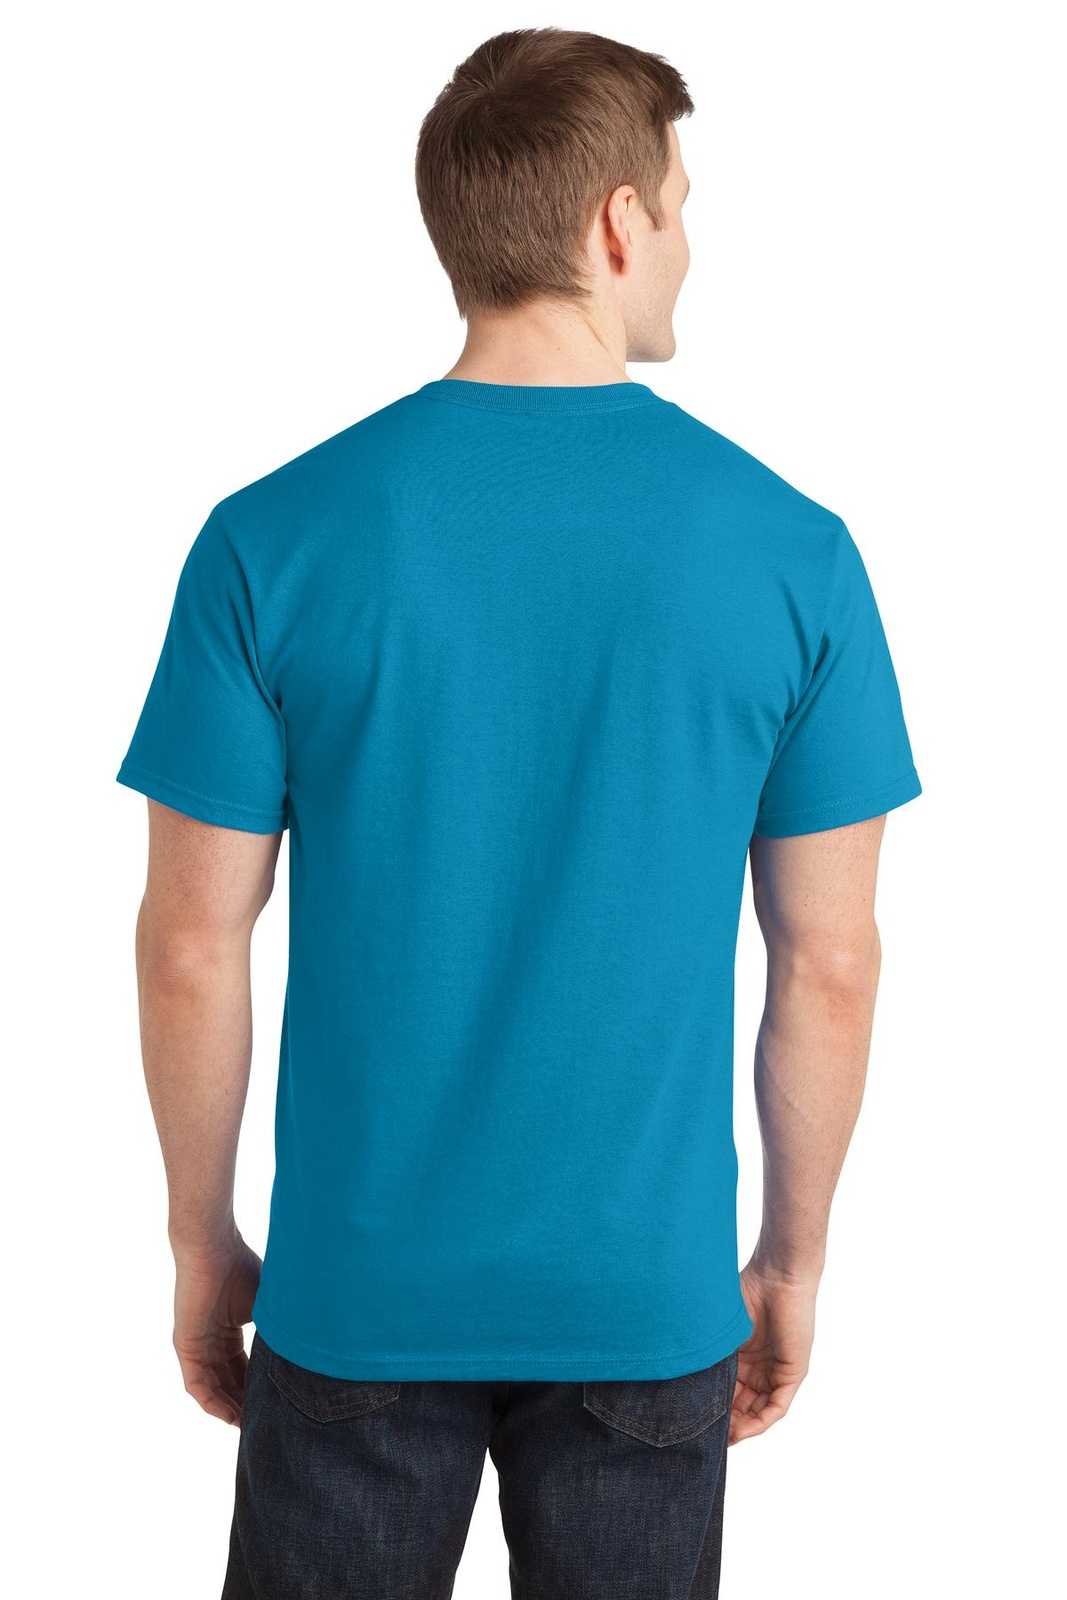 Port & Company PC150 Ring Spun Cotton Tee - Turquoise - HIT a Double - 1